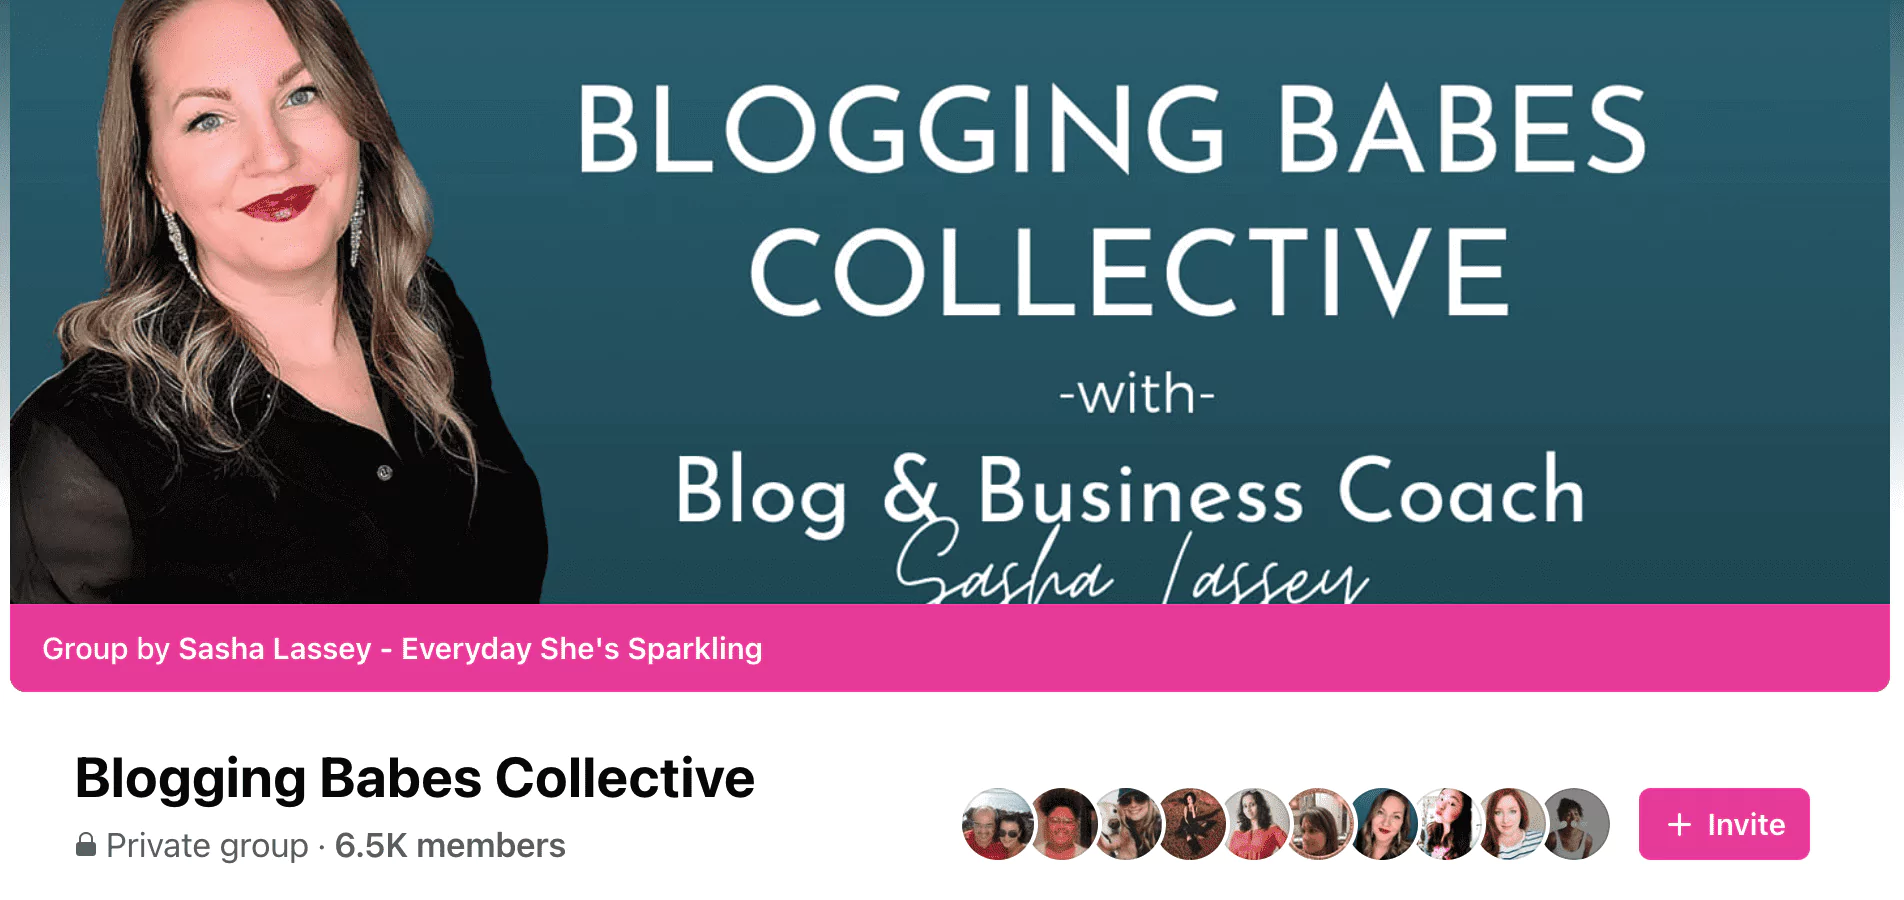 Blogging Babes Collective